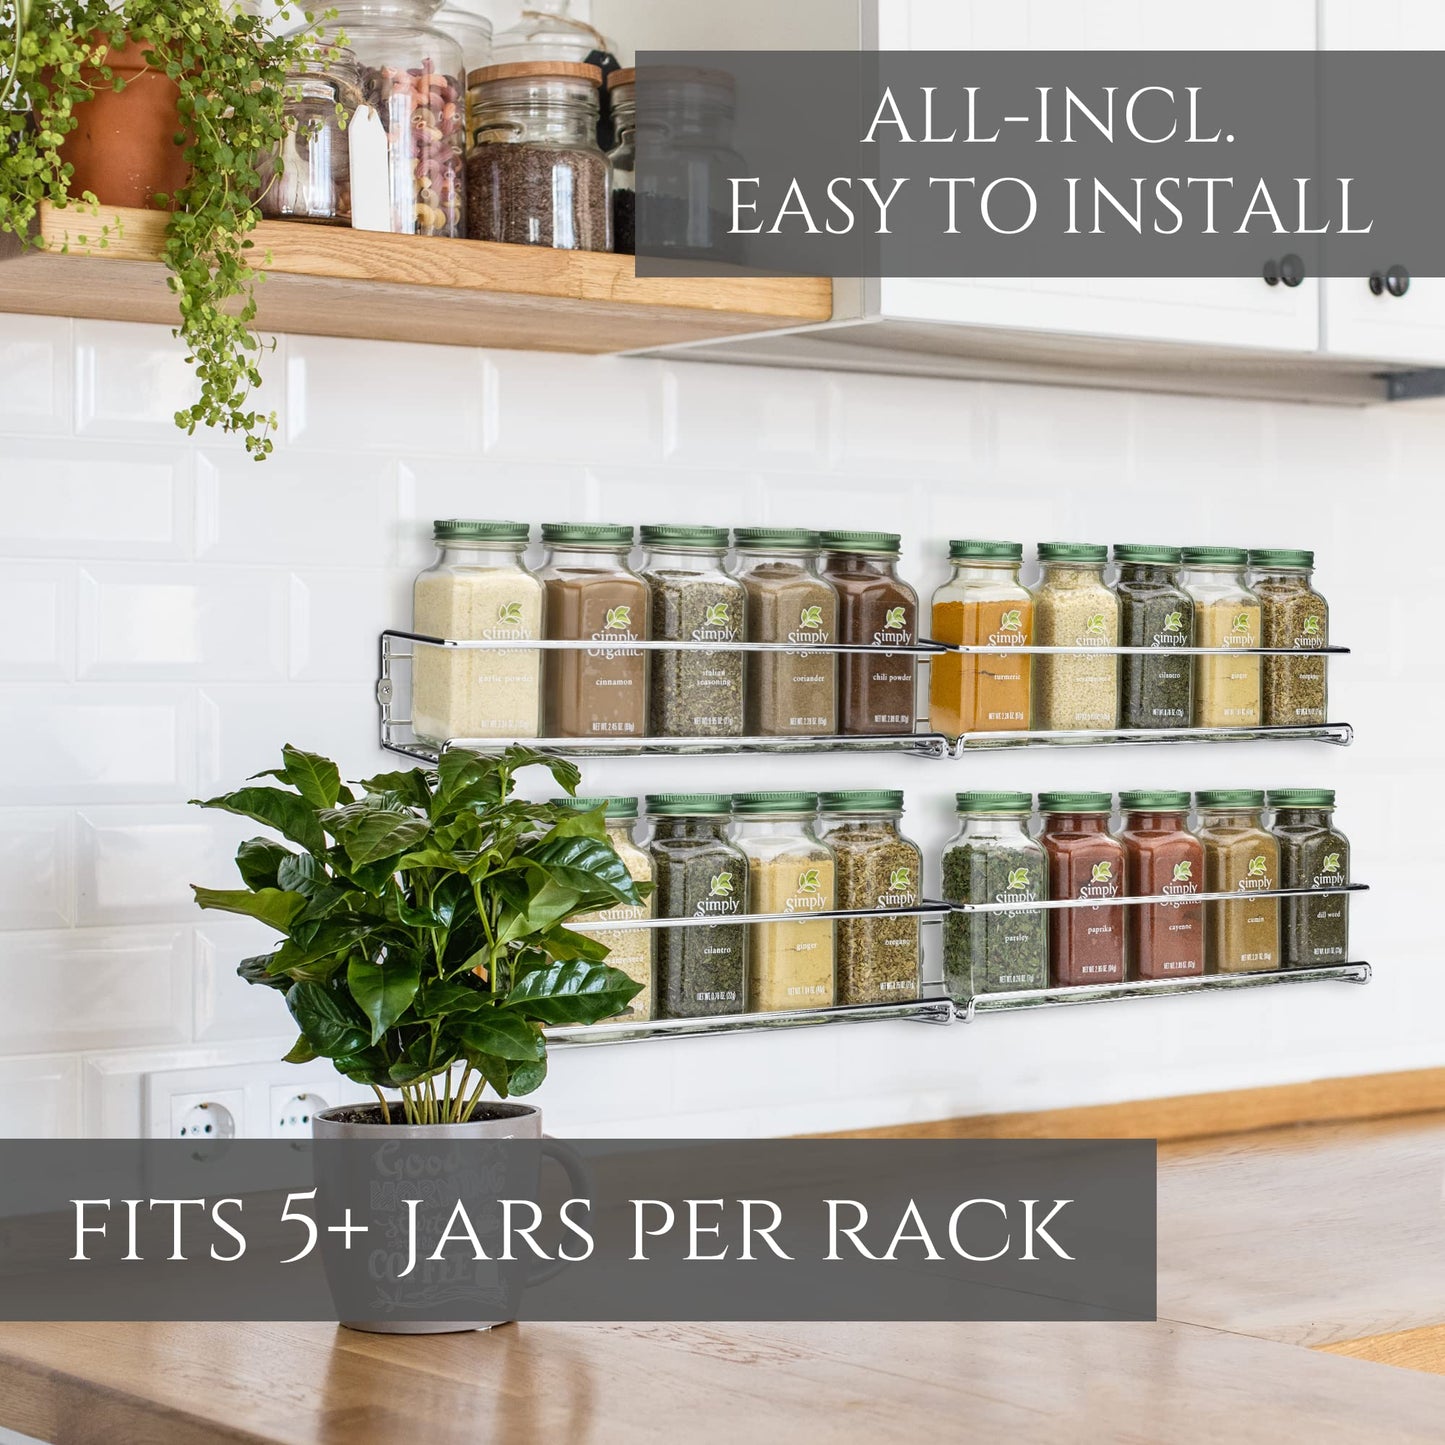 ZICOTO Premium Spice Rack Organizer for Cabinets or Wall Mounts - Space Saving Set of 4 Hanging Racks - Perfect Seasoning Organizer For Your Kitchen Cabinet, Cupboard or Pantry Door